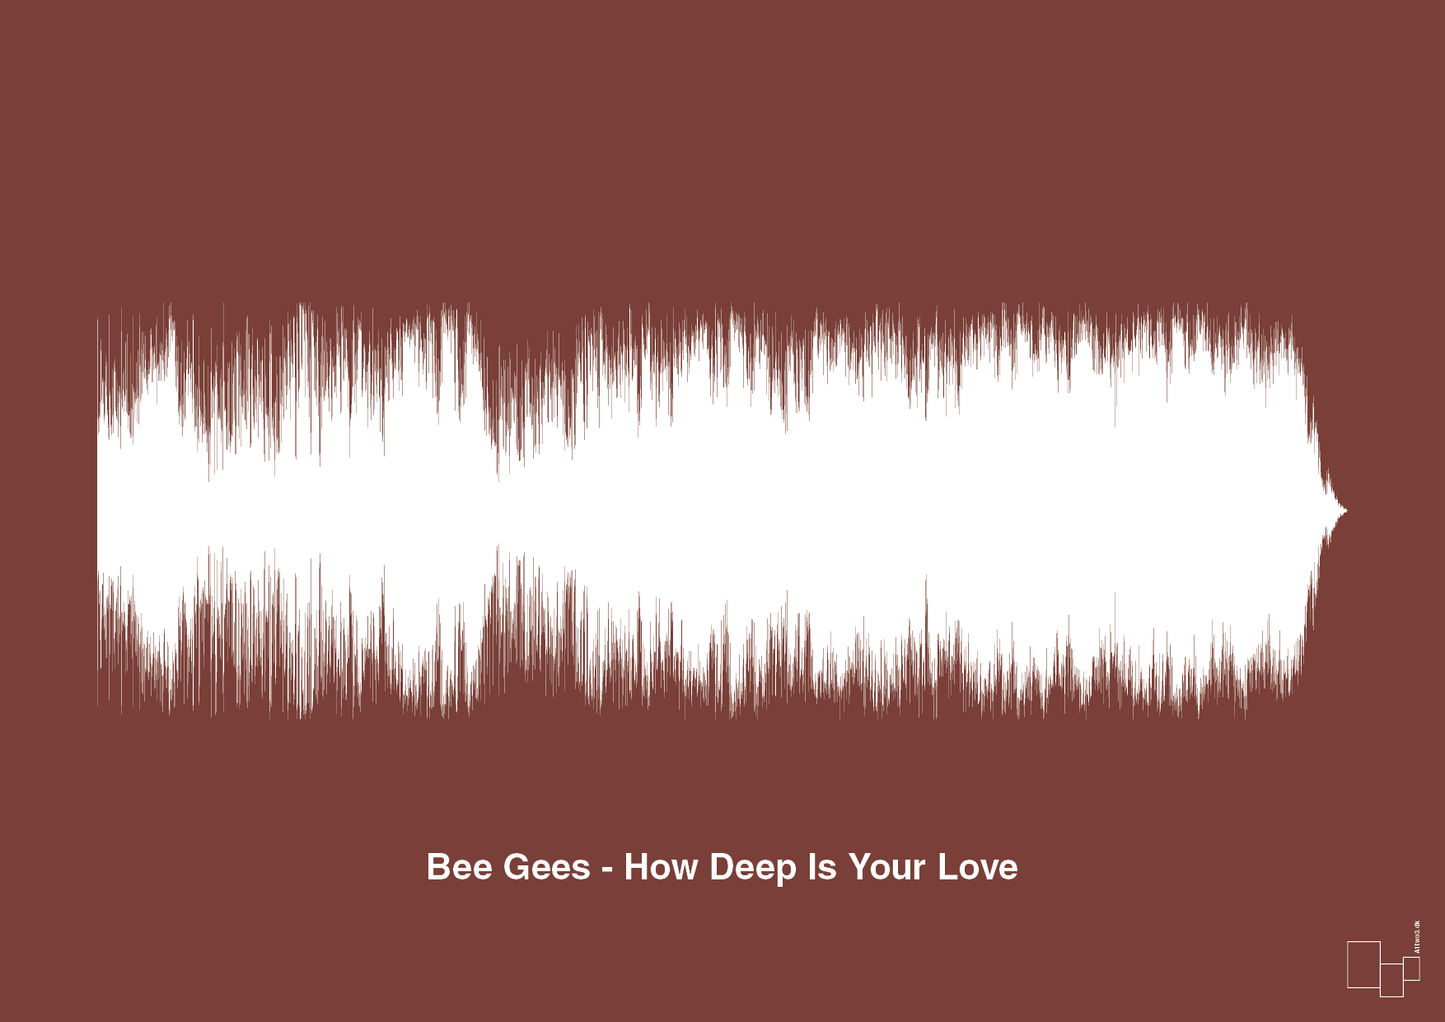 bee gees - how deep is your love - Plakat med Musik i Red Pepper